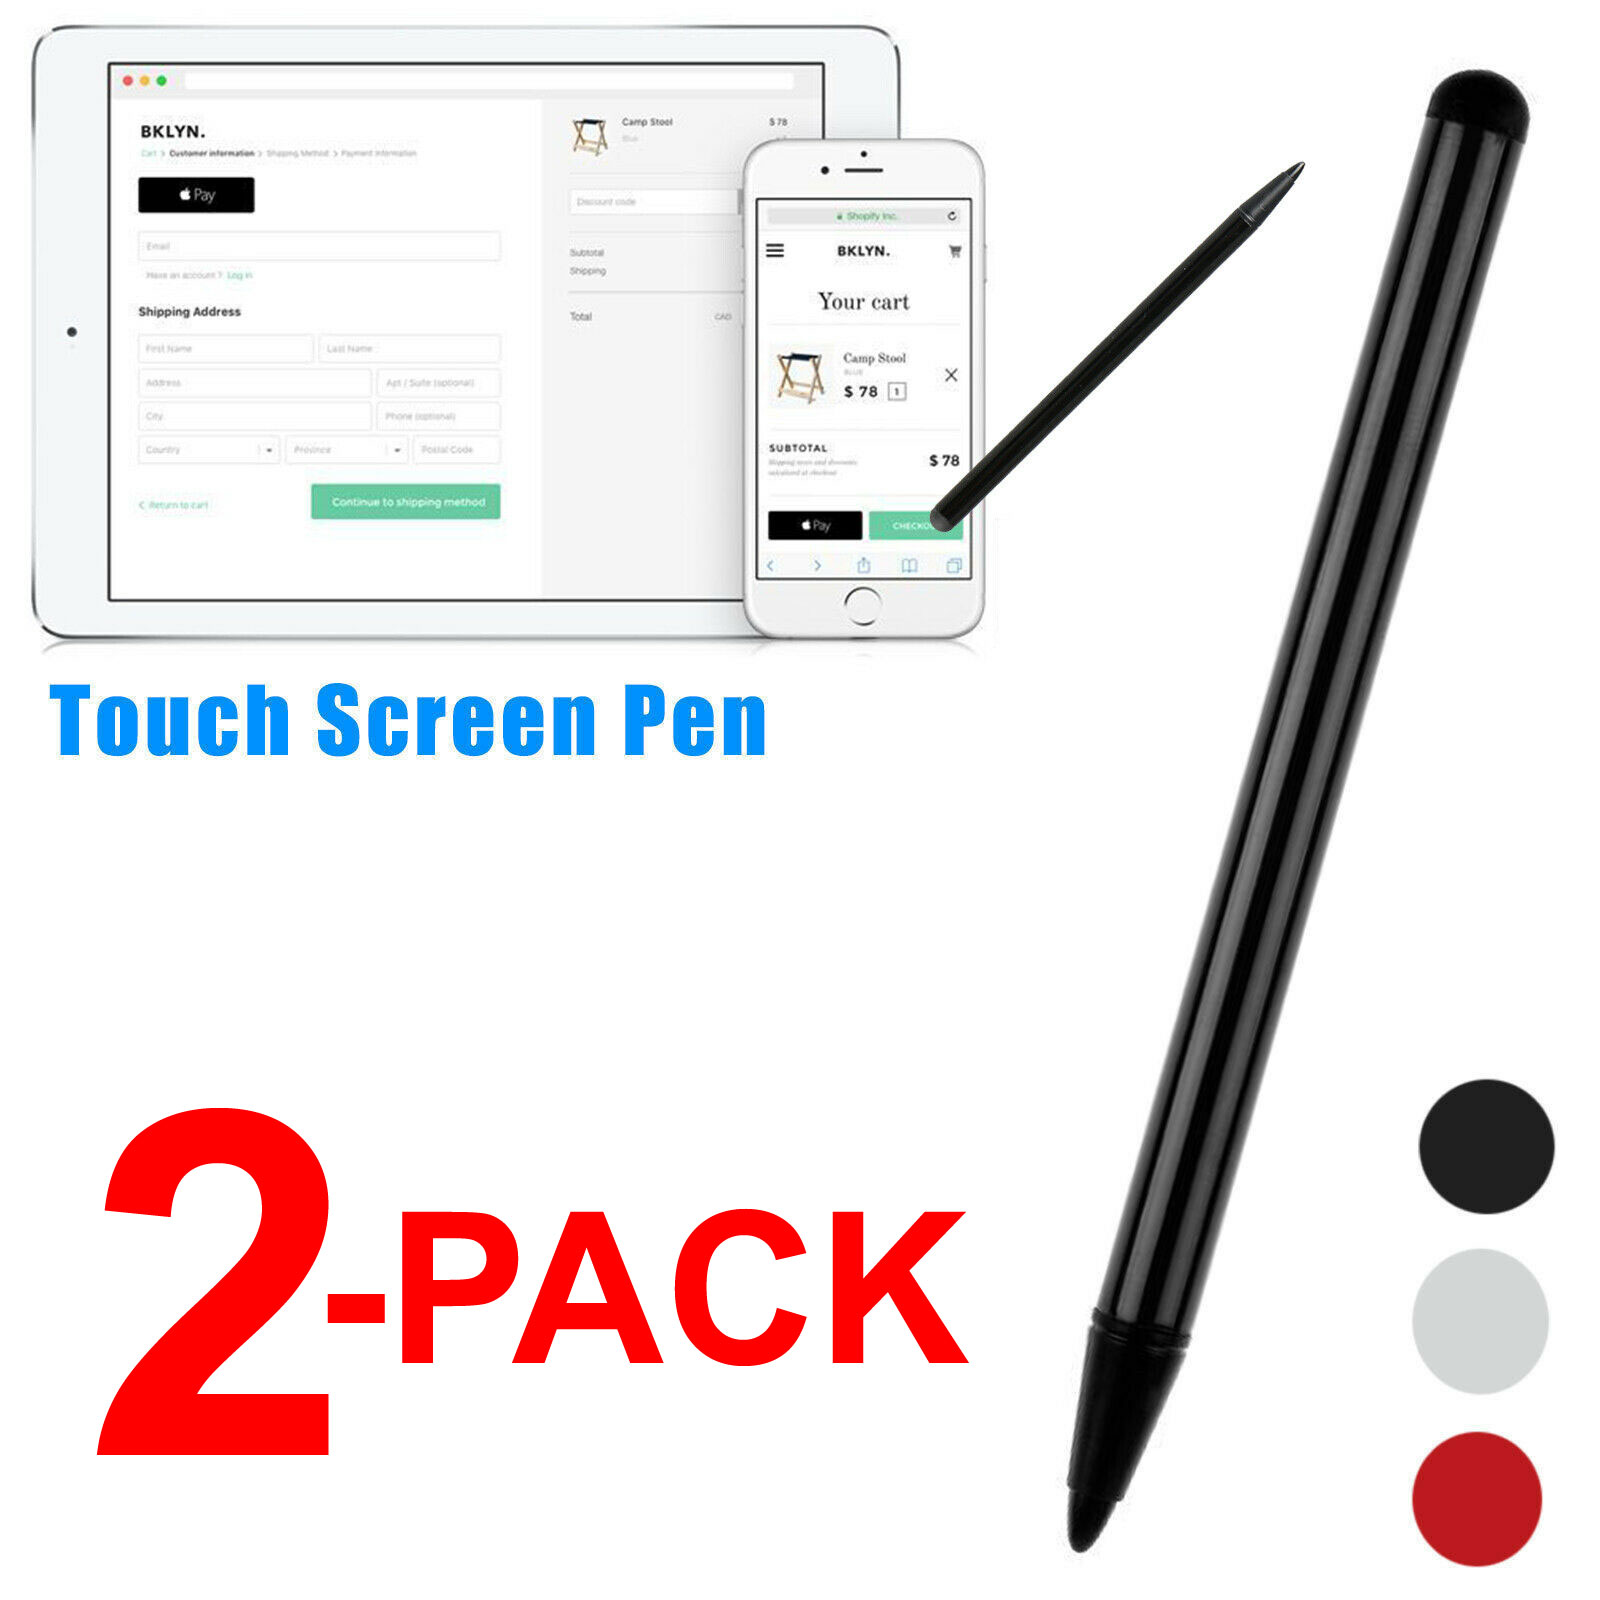 thumbnail 1 - 2-PACK Touch Screen Pen Stylus Universal For iPhone iPad Samsung Tablet Phone PC